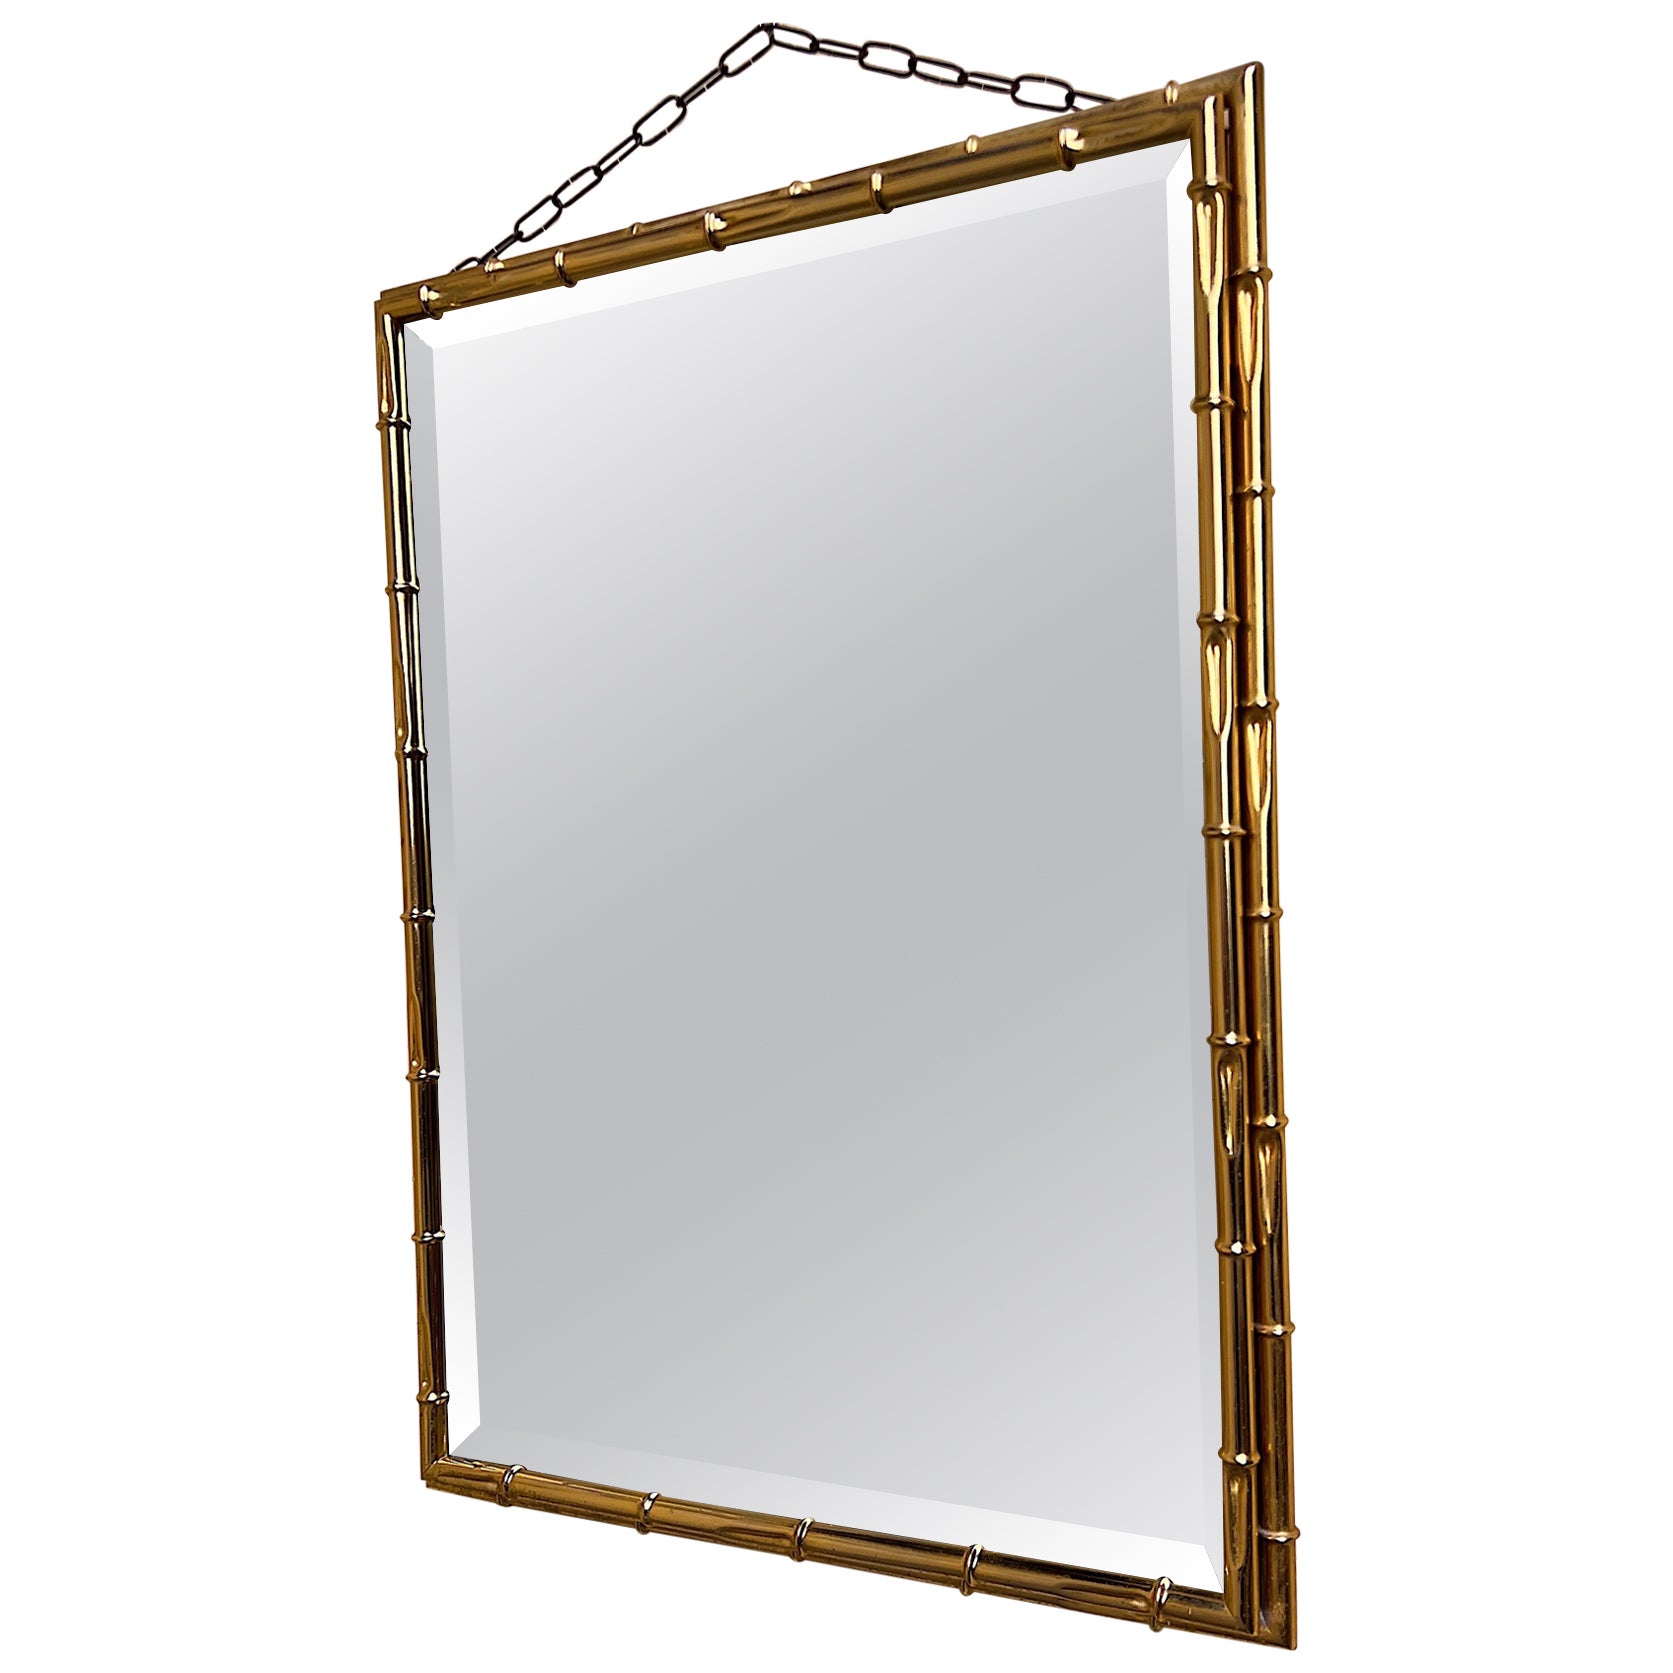 1970s wall mirror with a bamboo-effect gilded metal frame. 